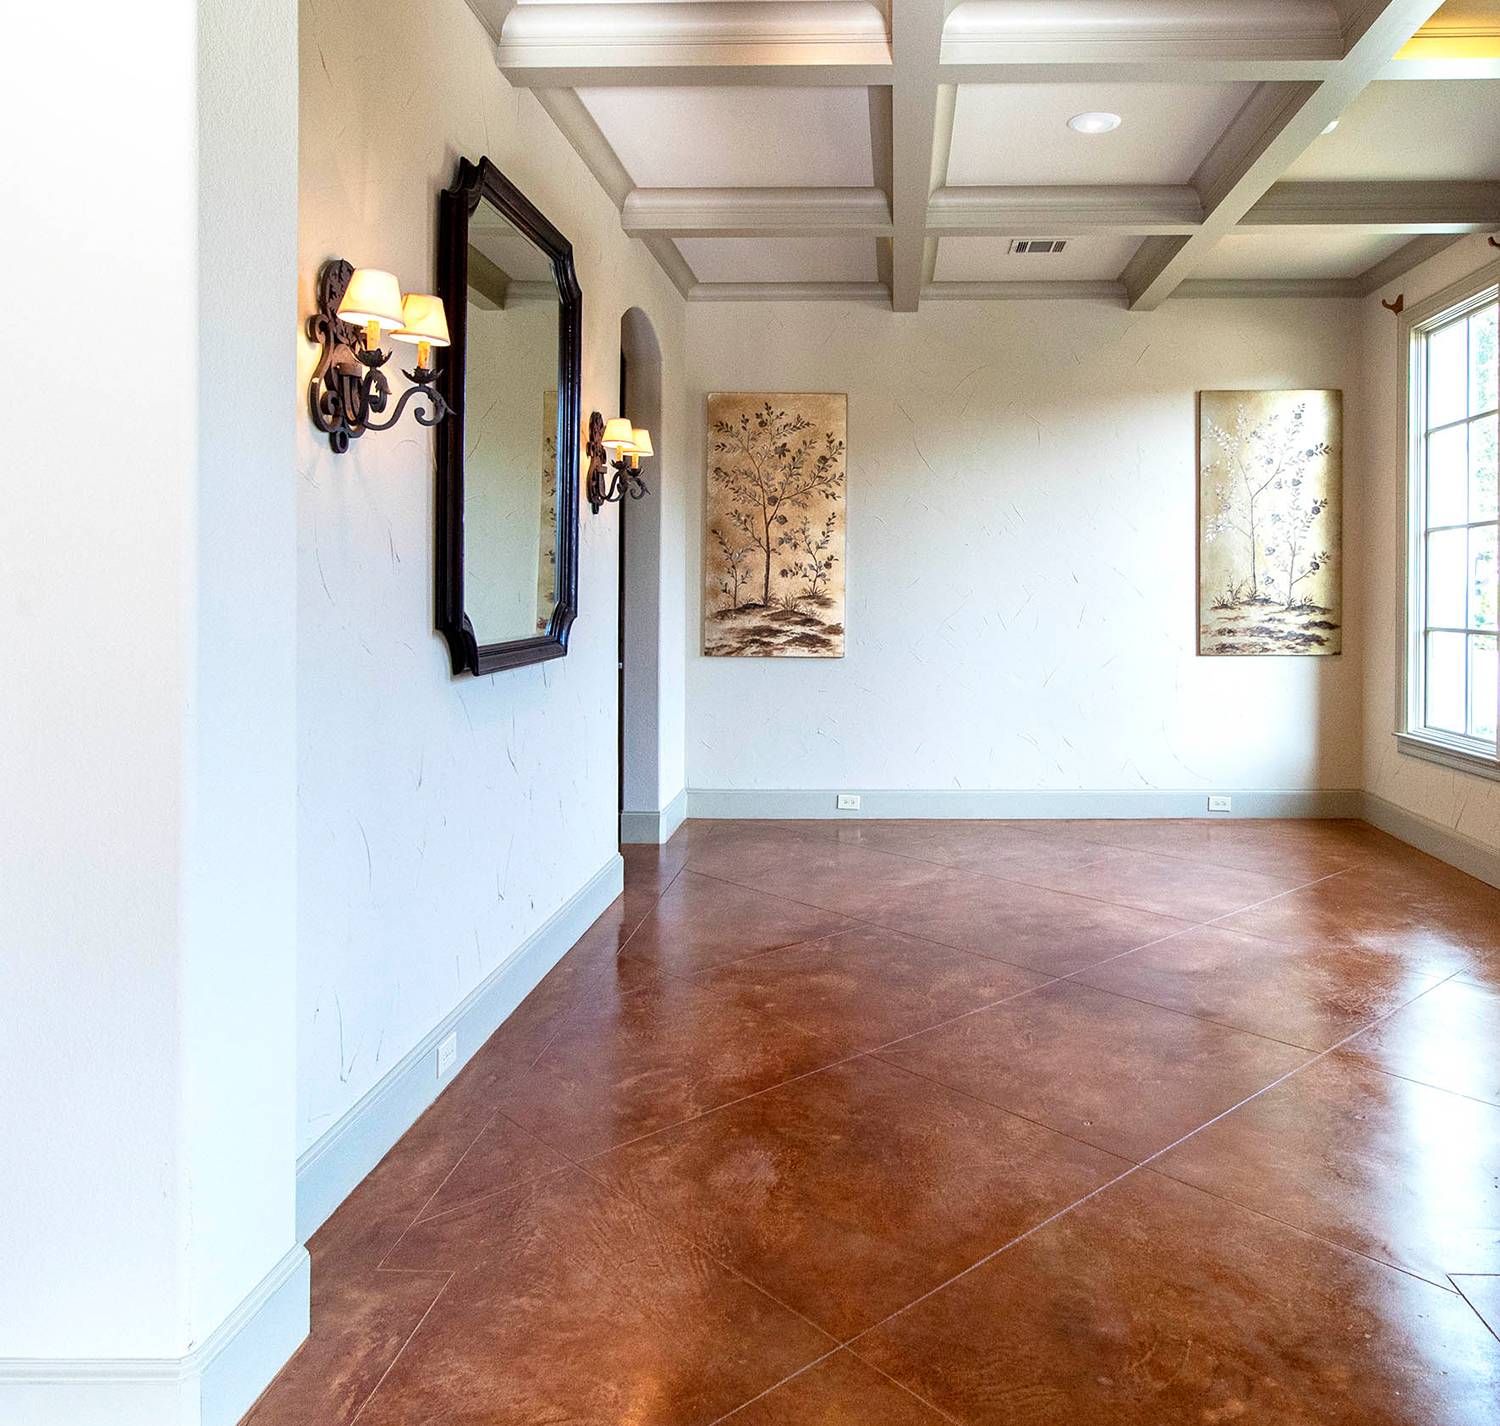 About Stained Concrete Floors